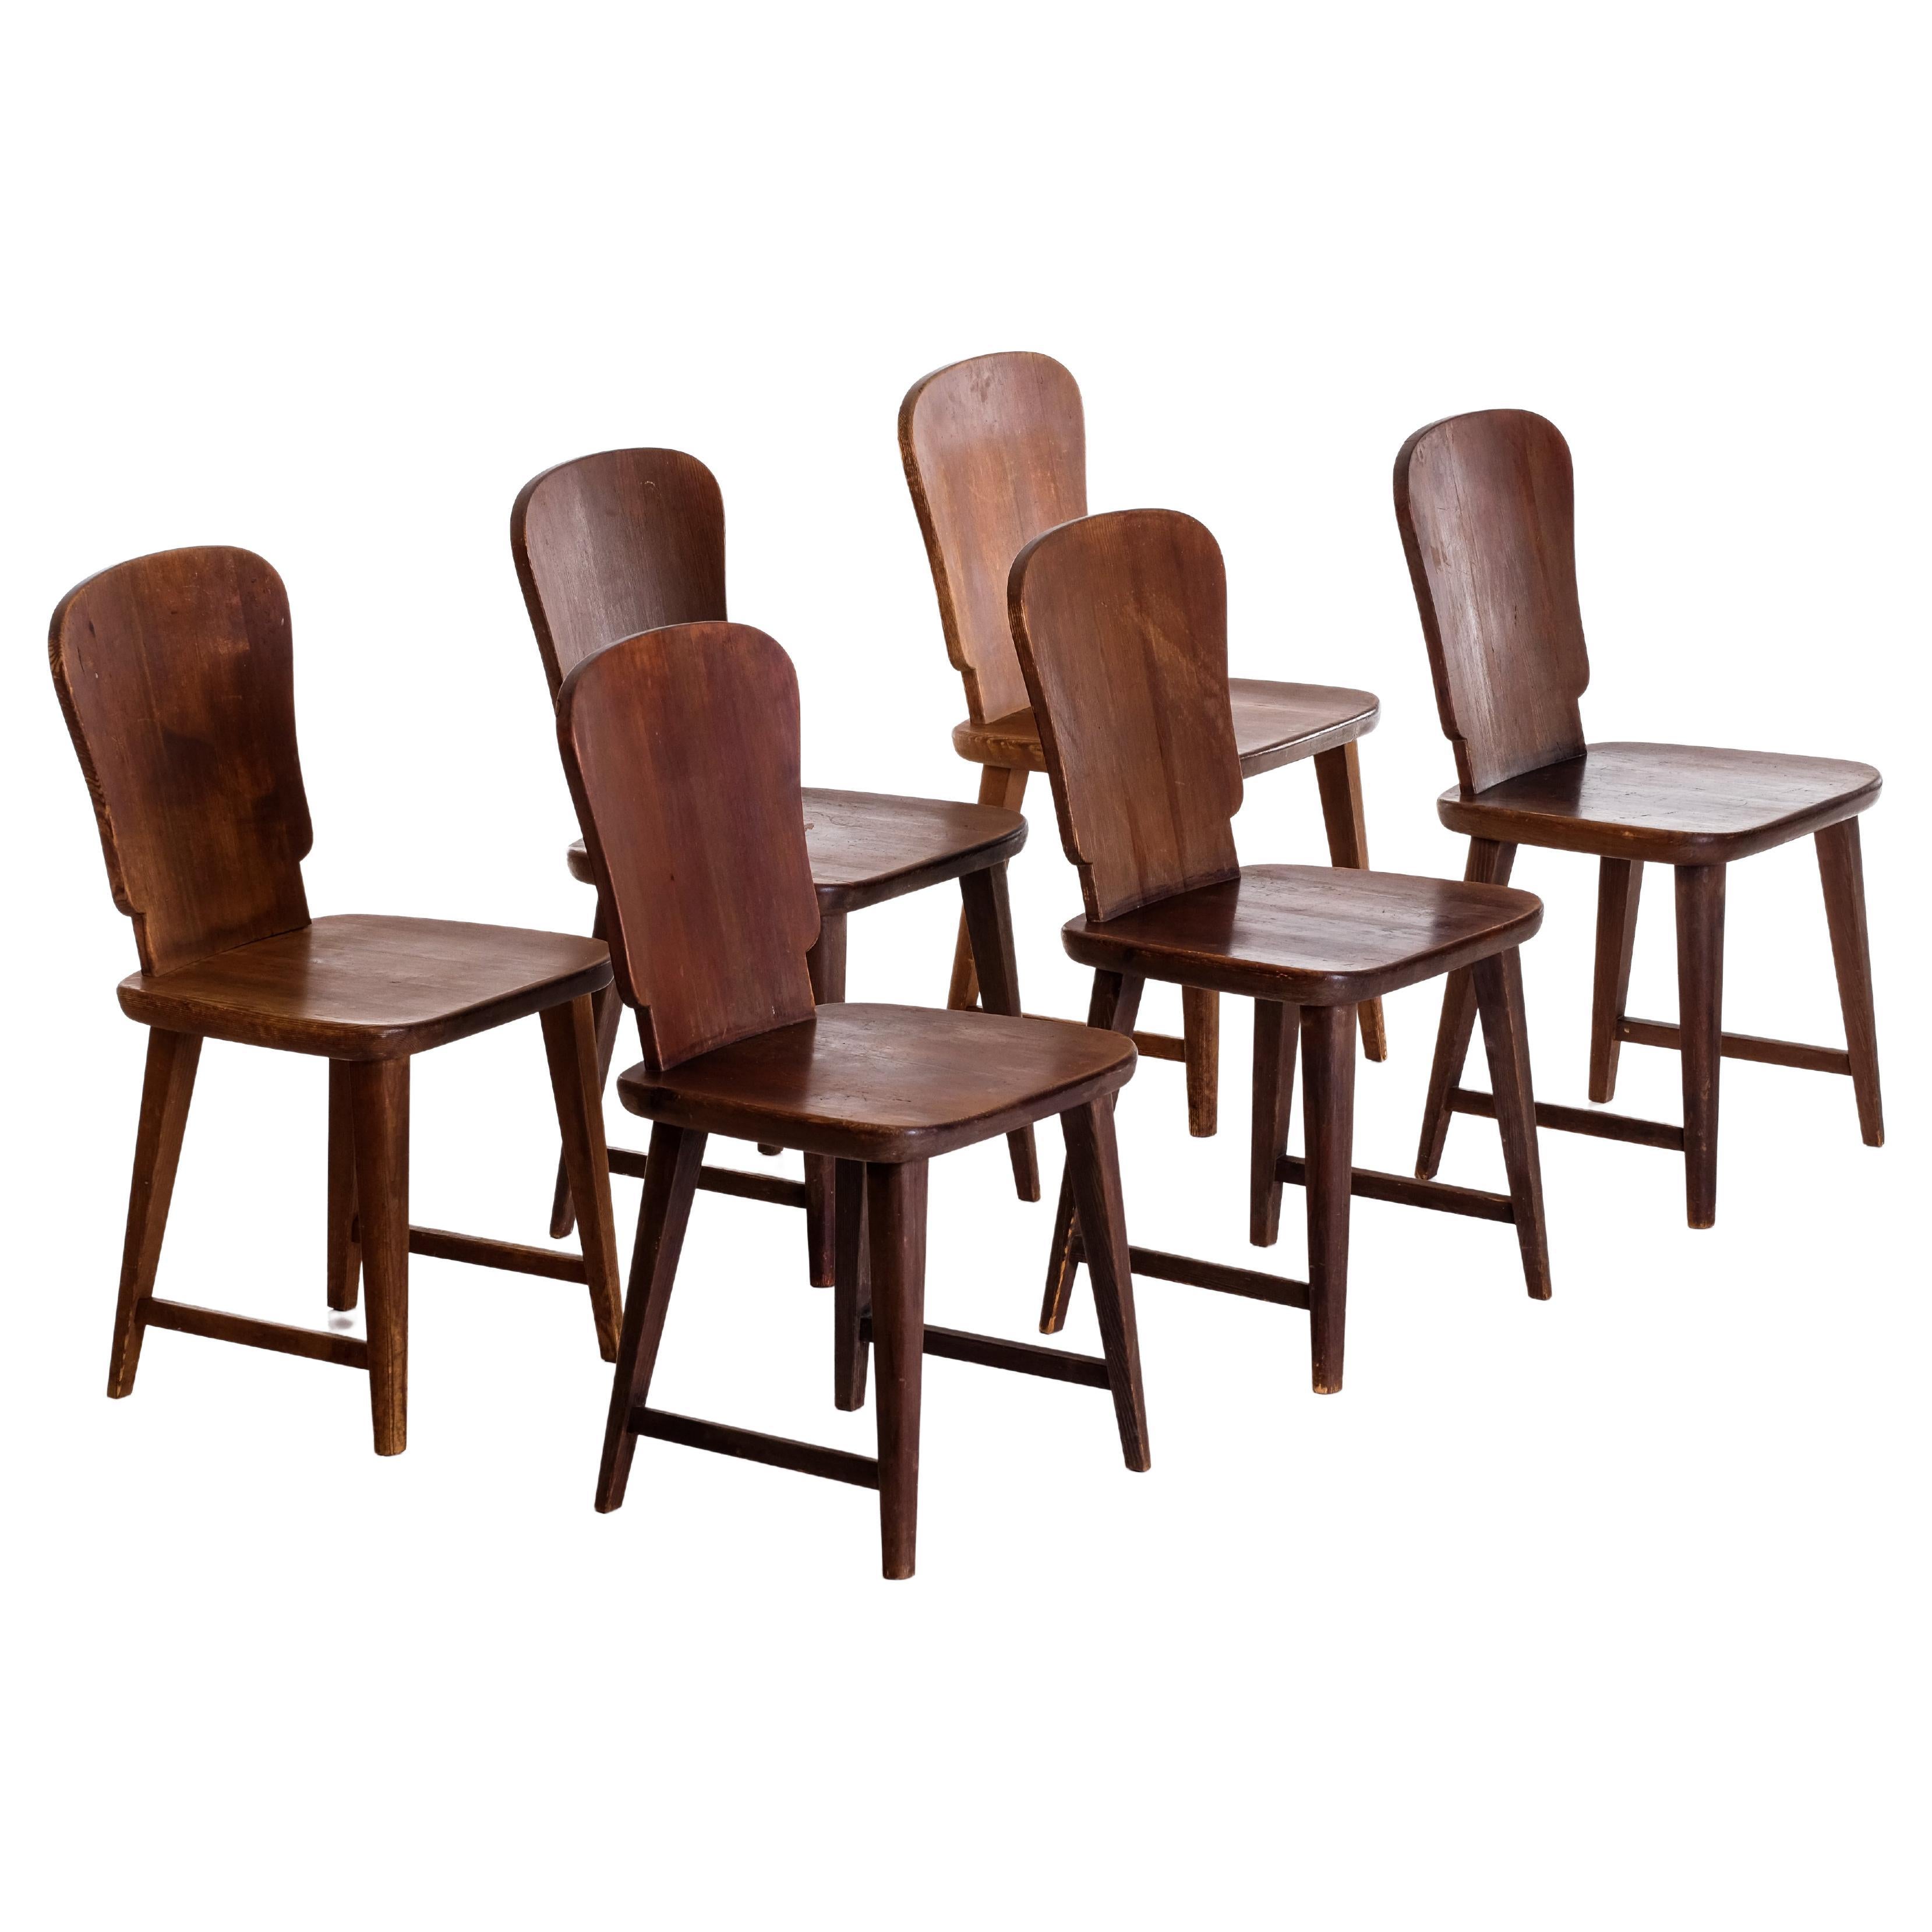 Rare Set of 6 Swedish Pine Chairs, 1940s For Sale